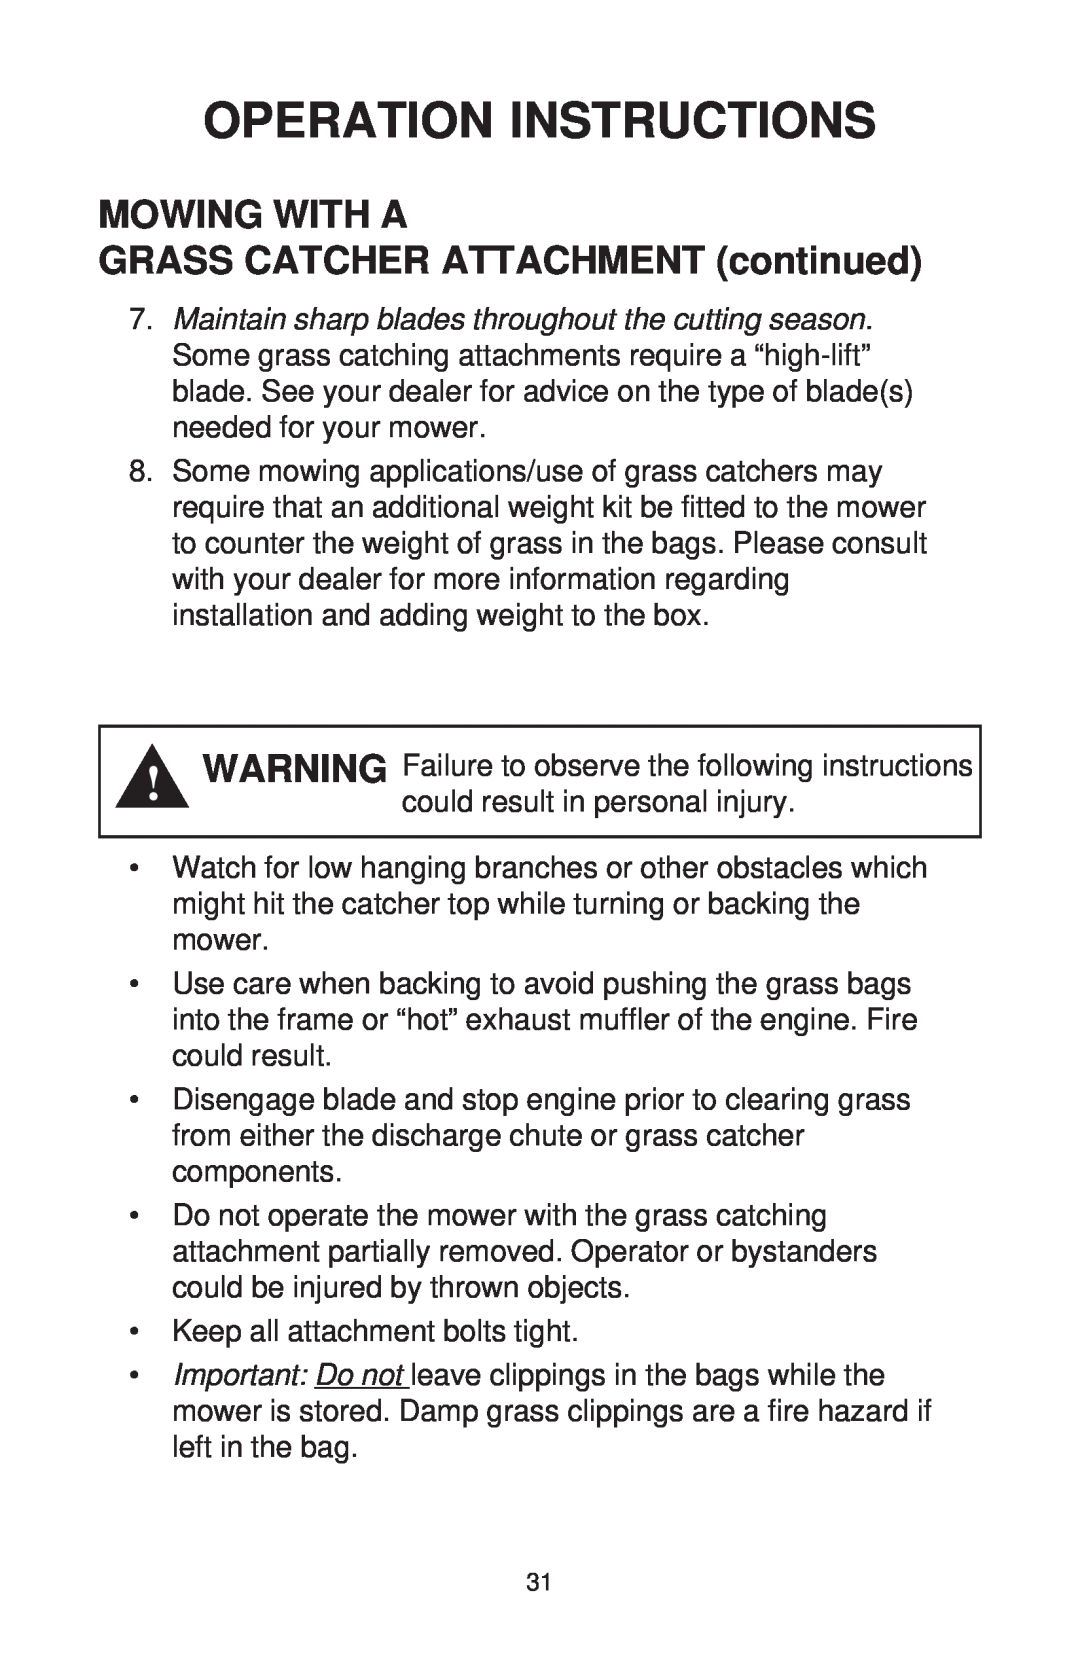 Dixon ZTR 44/968999538 manual MOWING WITH A GRASS CATCHER ATTACHMENT continued, Operation Instructions 